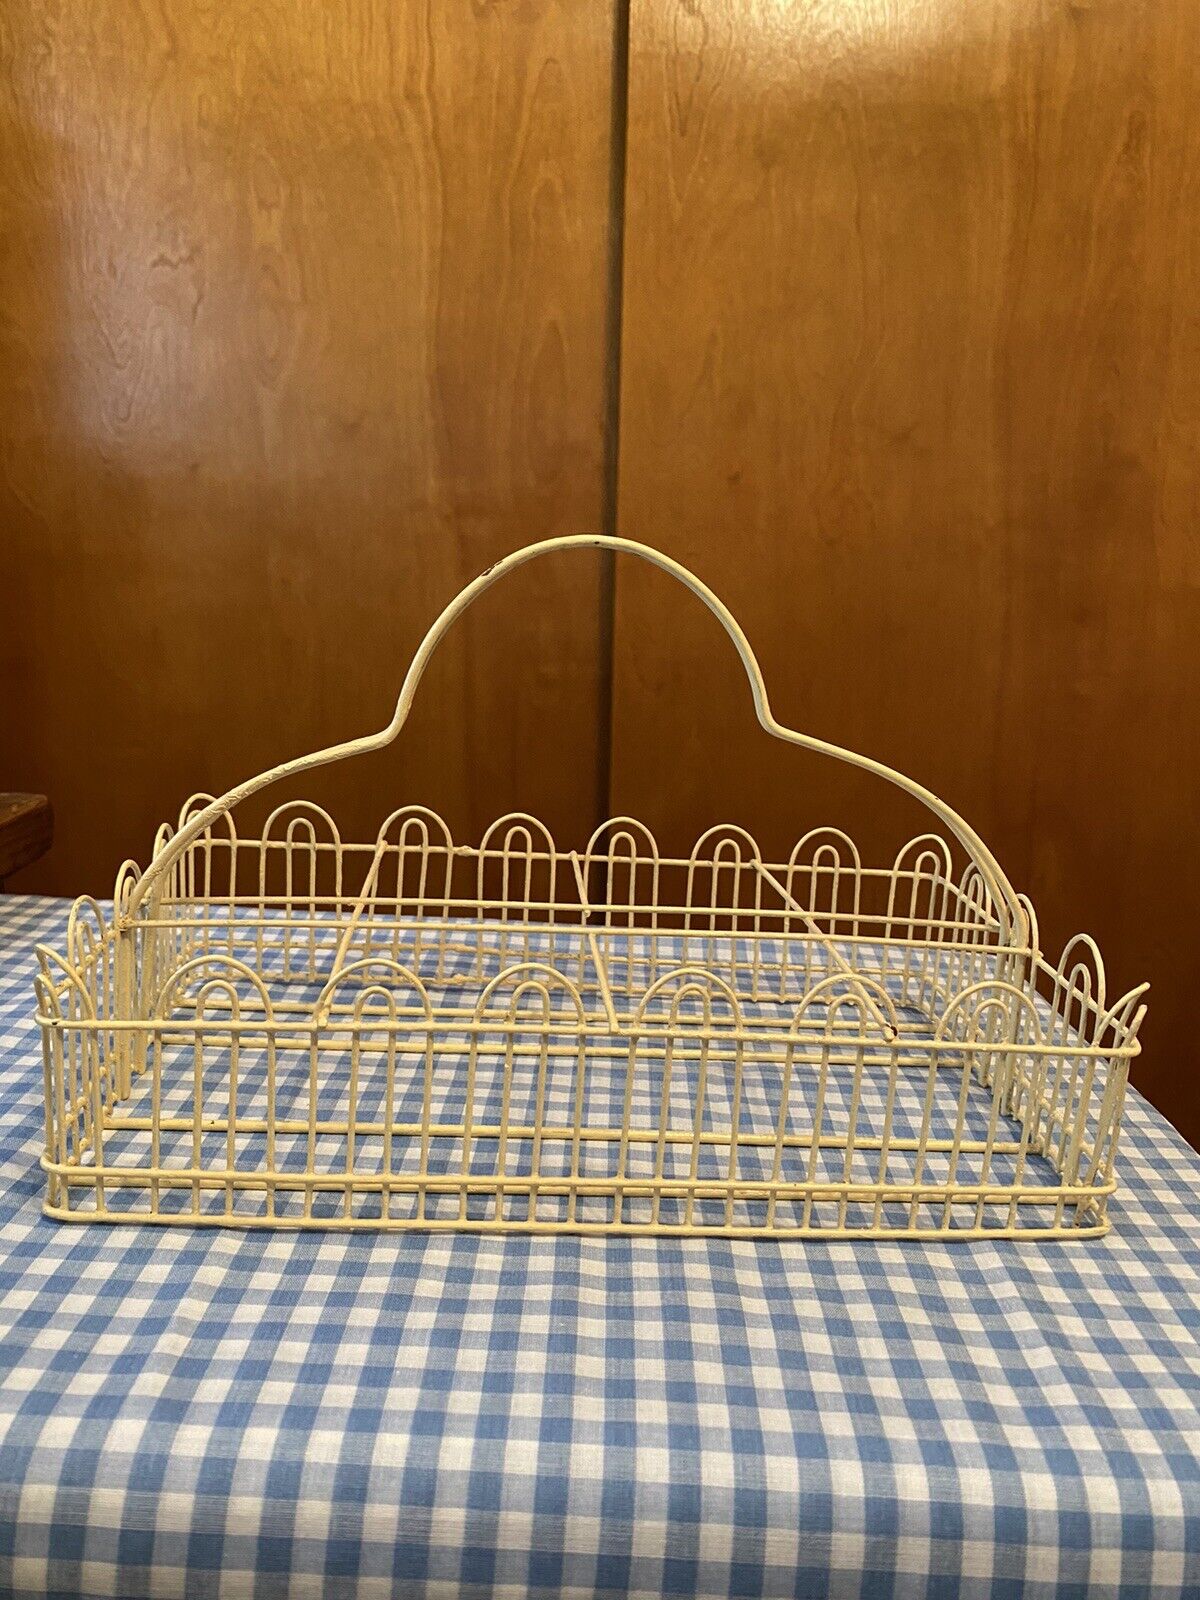 VINTAGE METAL 8 GLASS CADDY CARRIER,  yellow